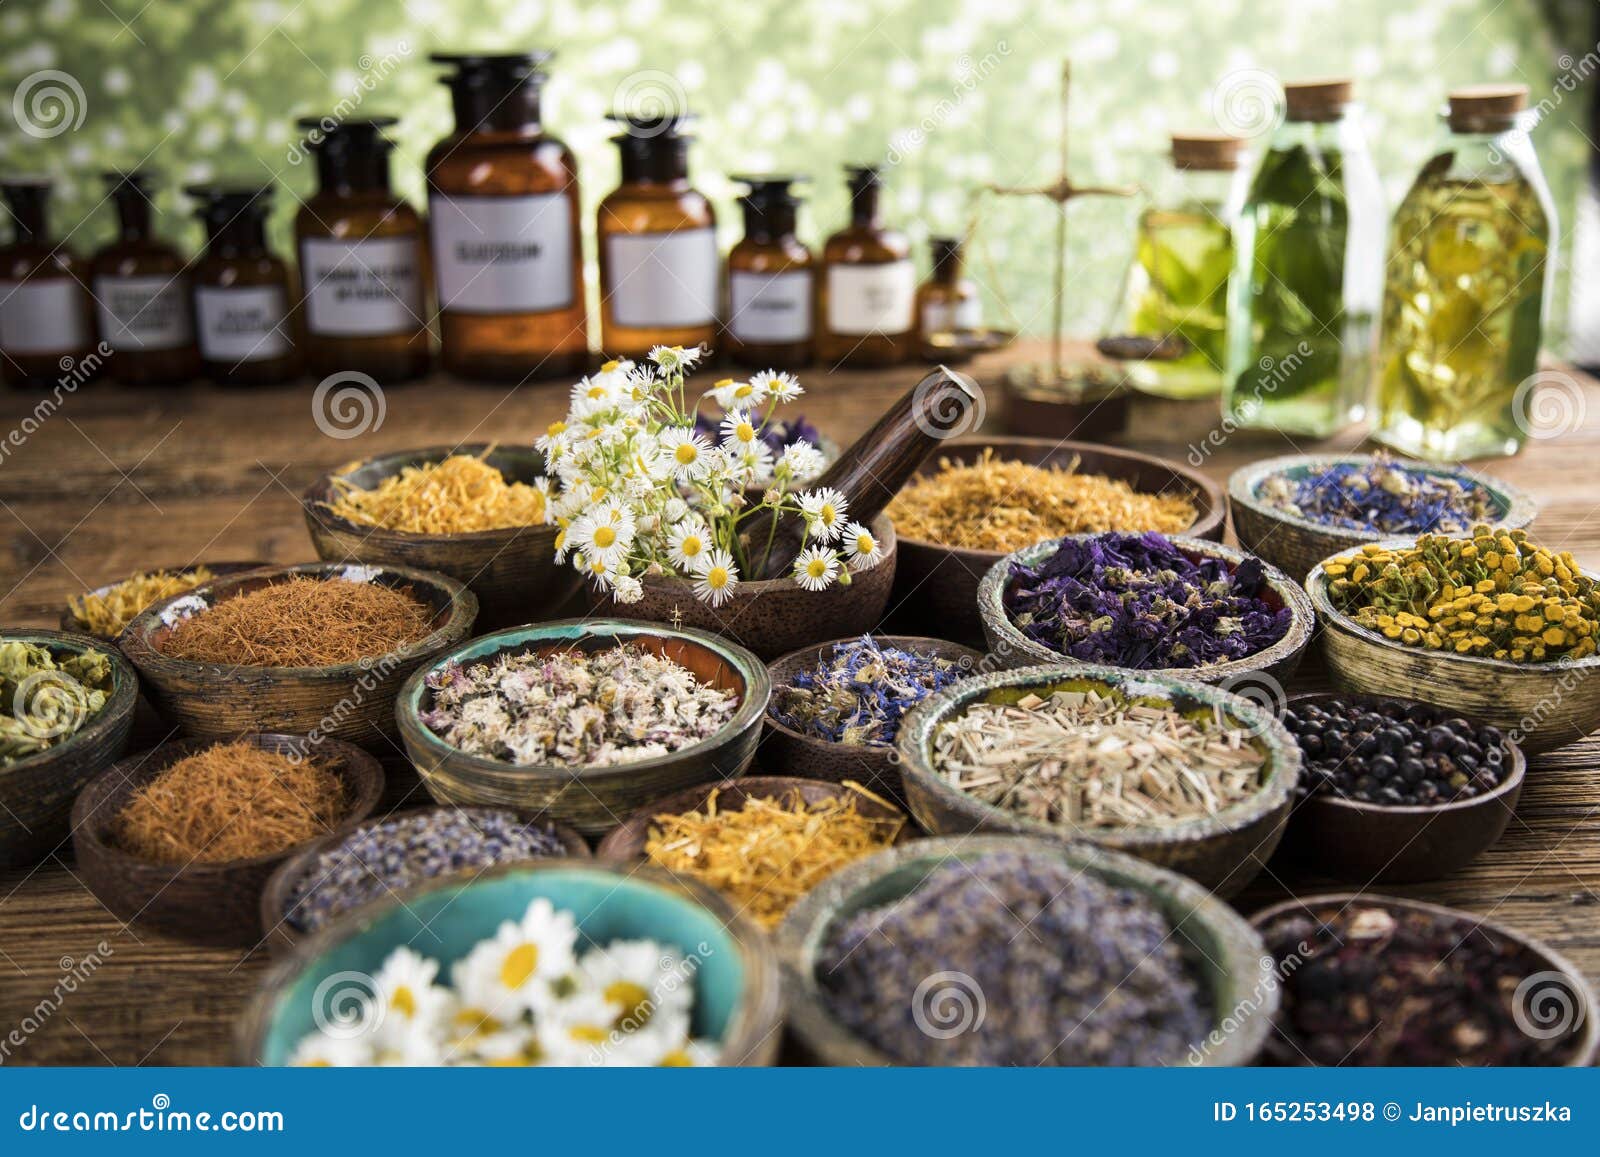 Natural Remedy, Healing Herbs Background Stock Photo - Image of harvesting,  mixture: 165253498